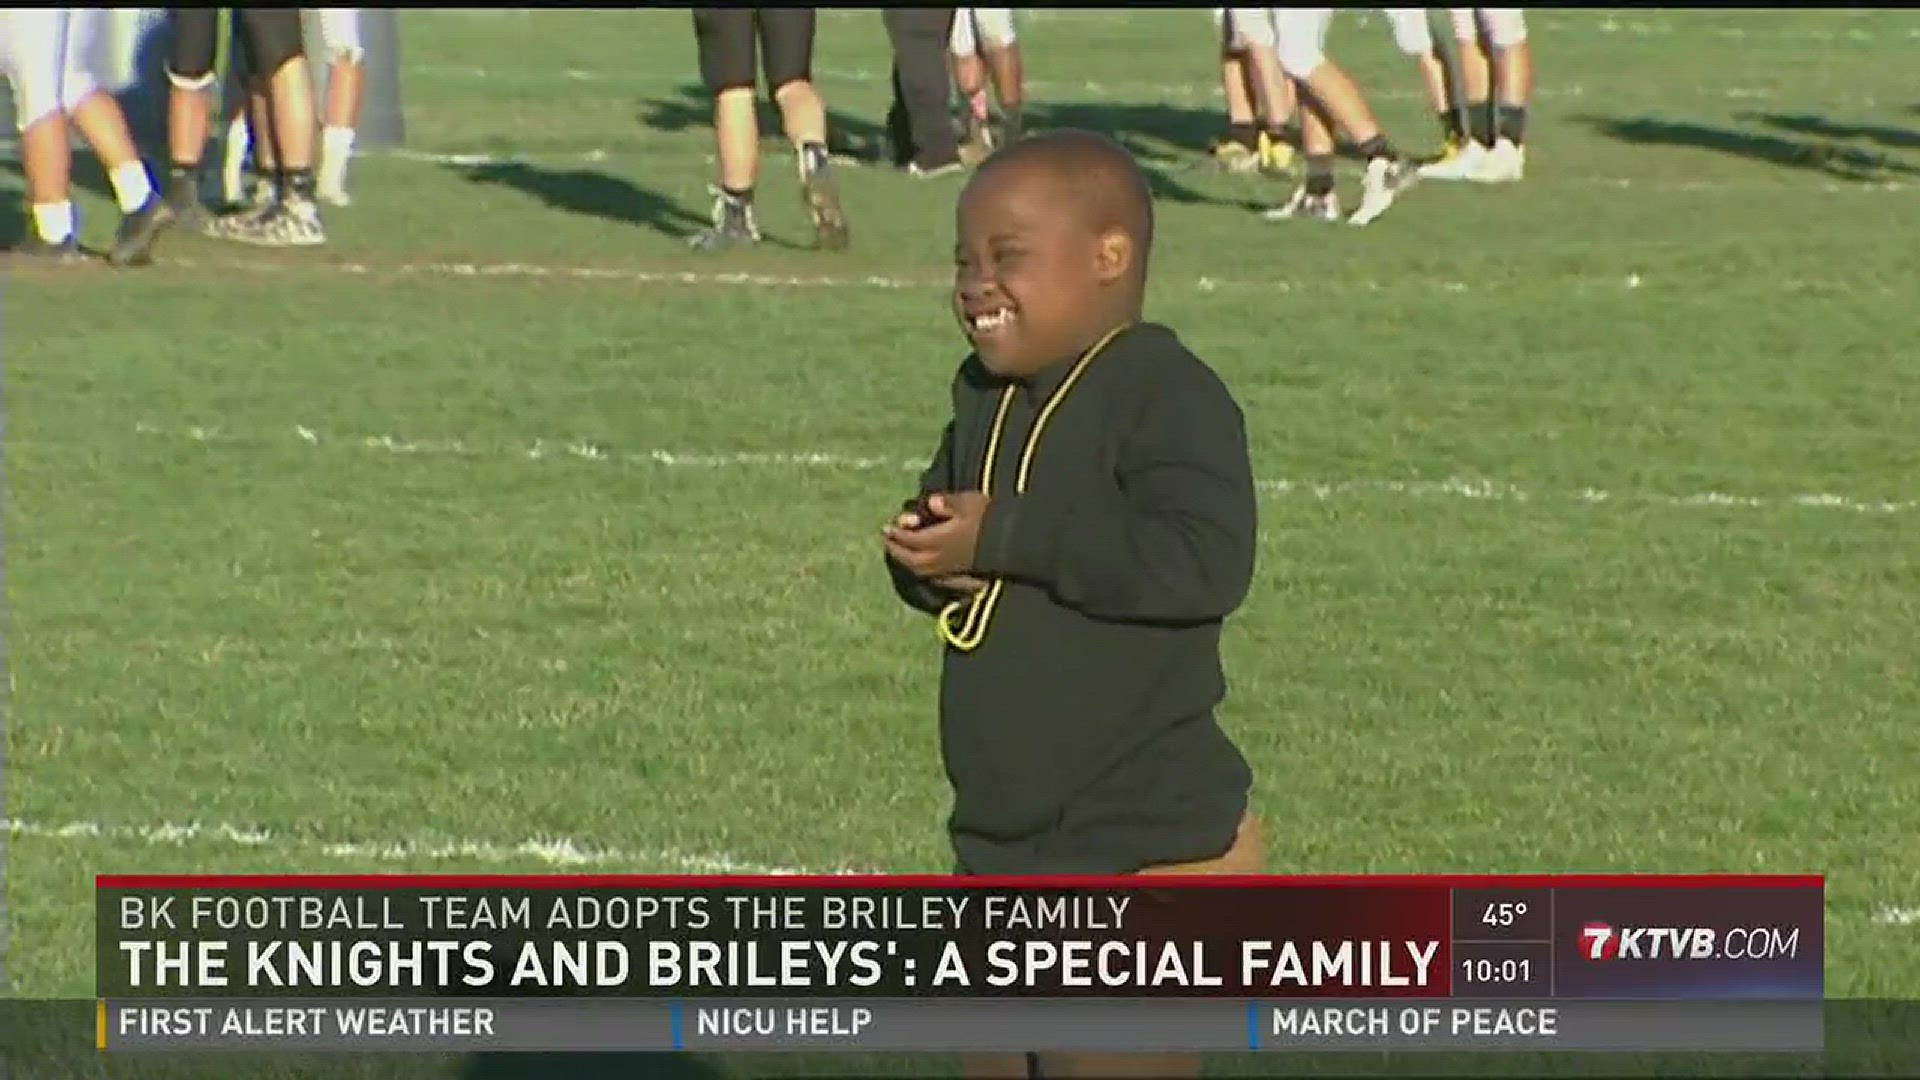 bishop-kelly-football-team-embraces-boy-with-special-needs-ktvb